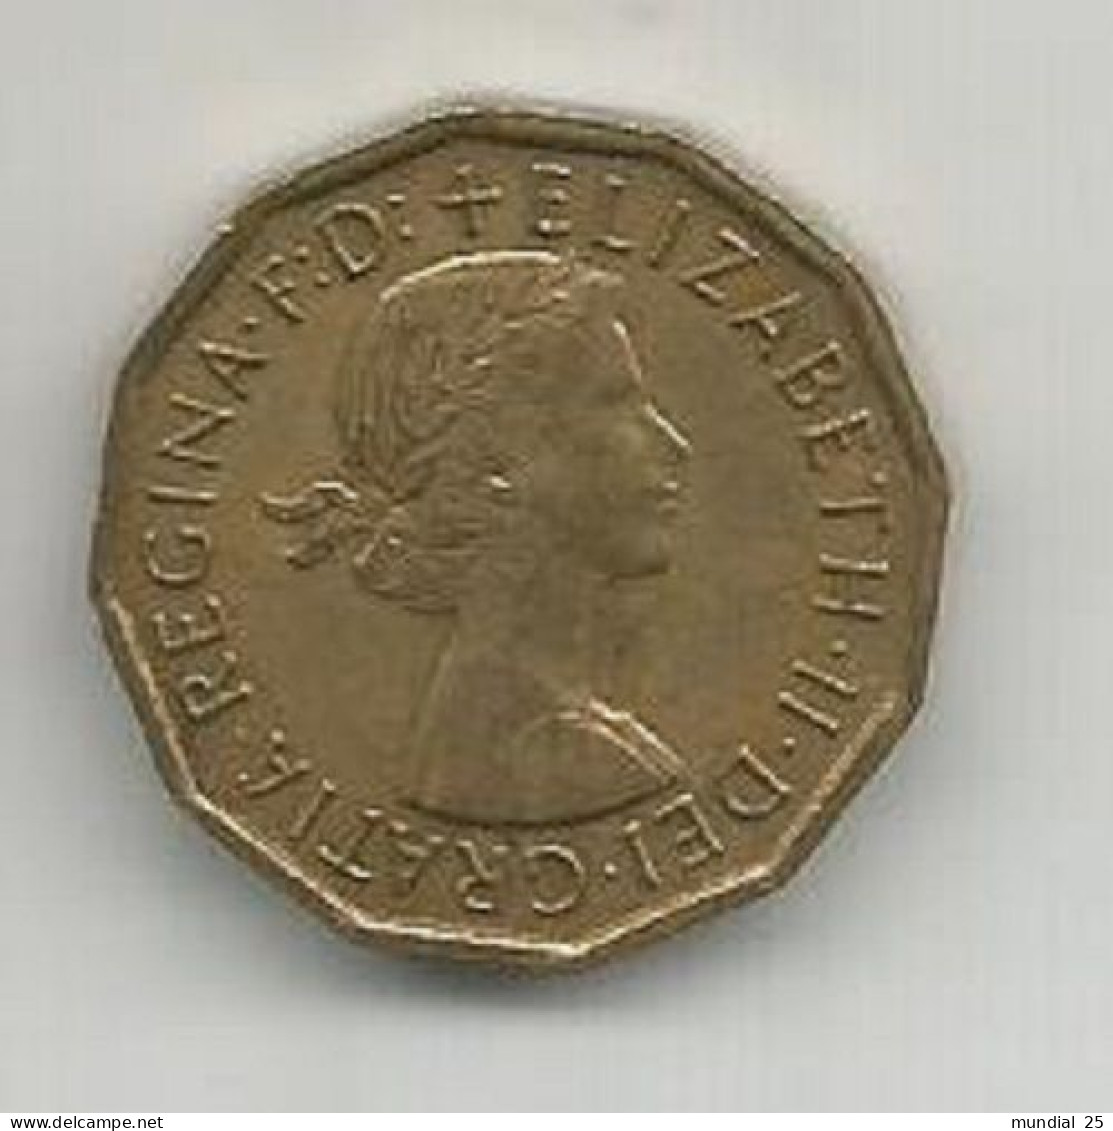 GREAT BRITAIN 3 PENCE 1966 - F. 3 Pence